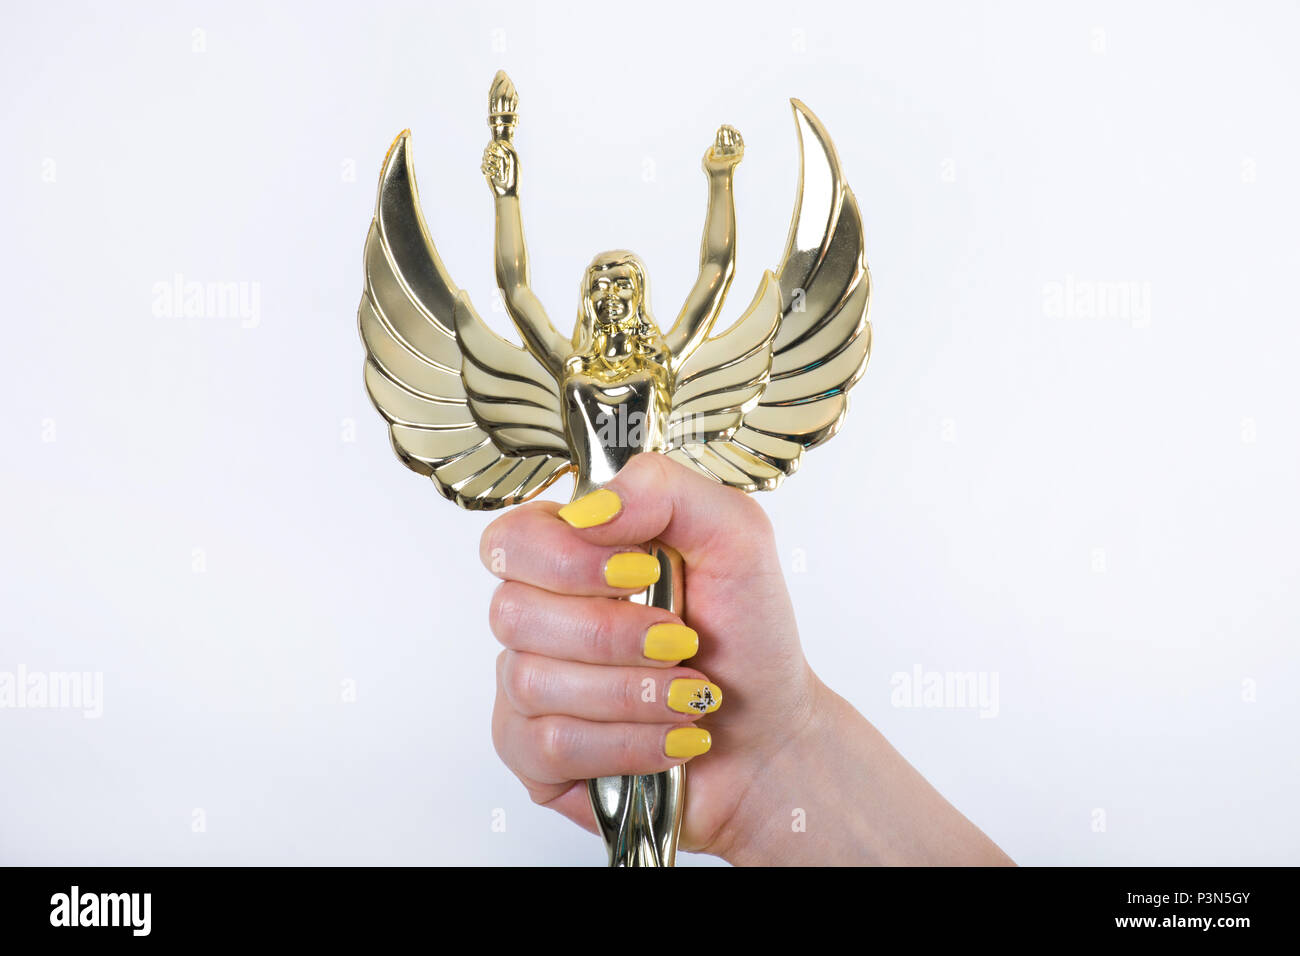 Golden Angel statue with torch and opened wings in female hand with yellow manicure nails isolated on white background. Close up, studio shoot Stock Photo